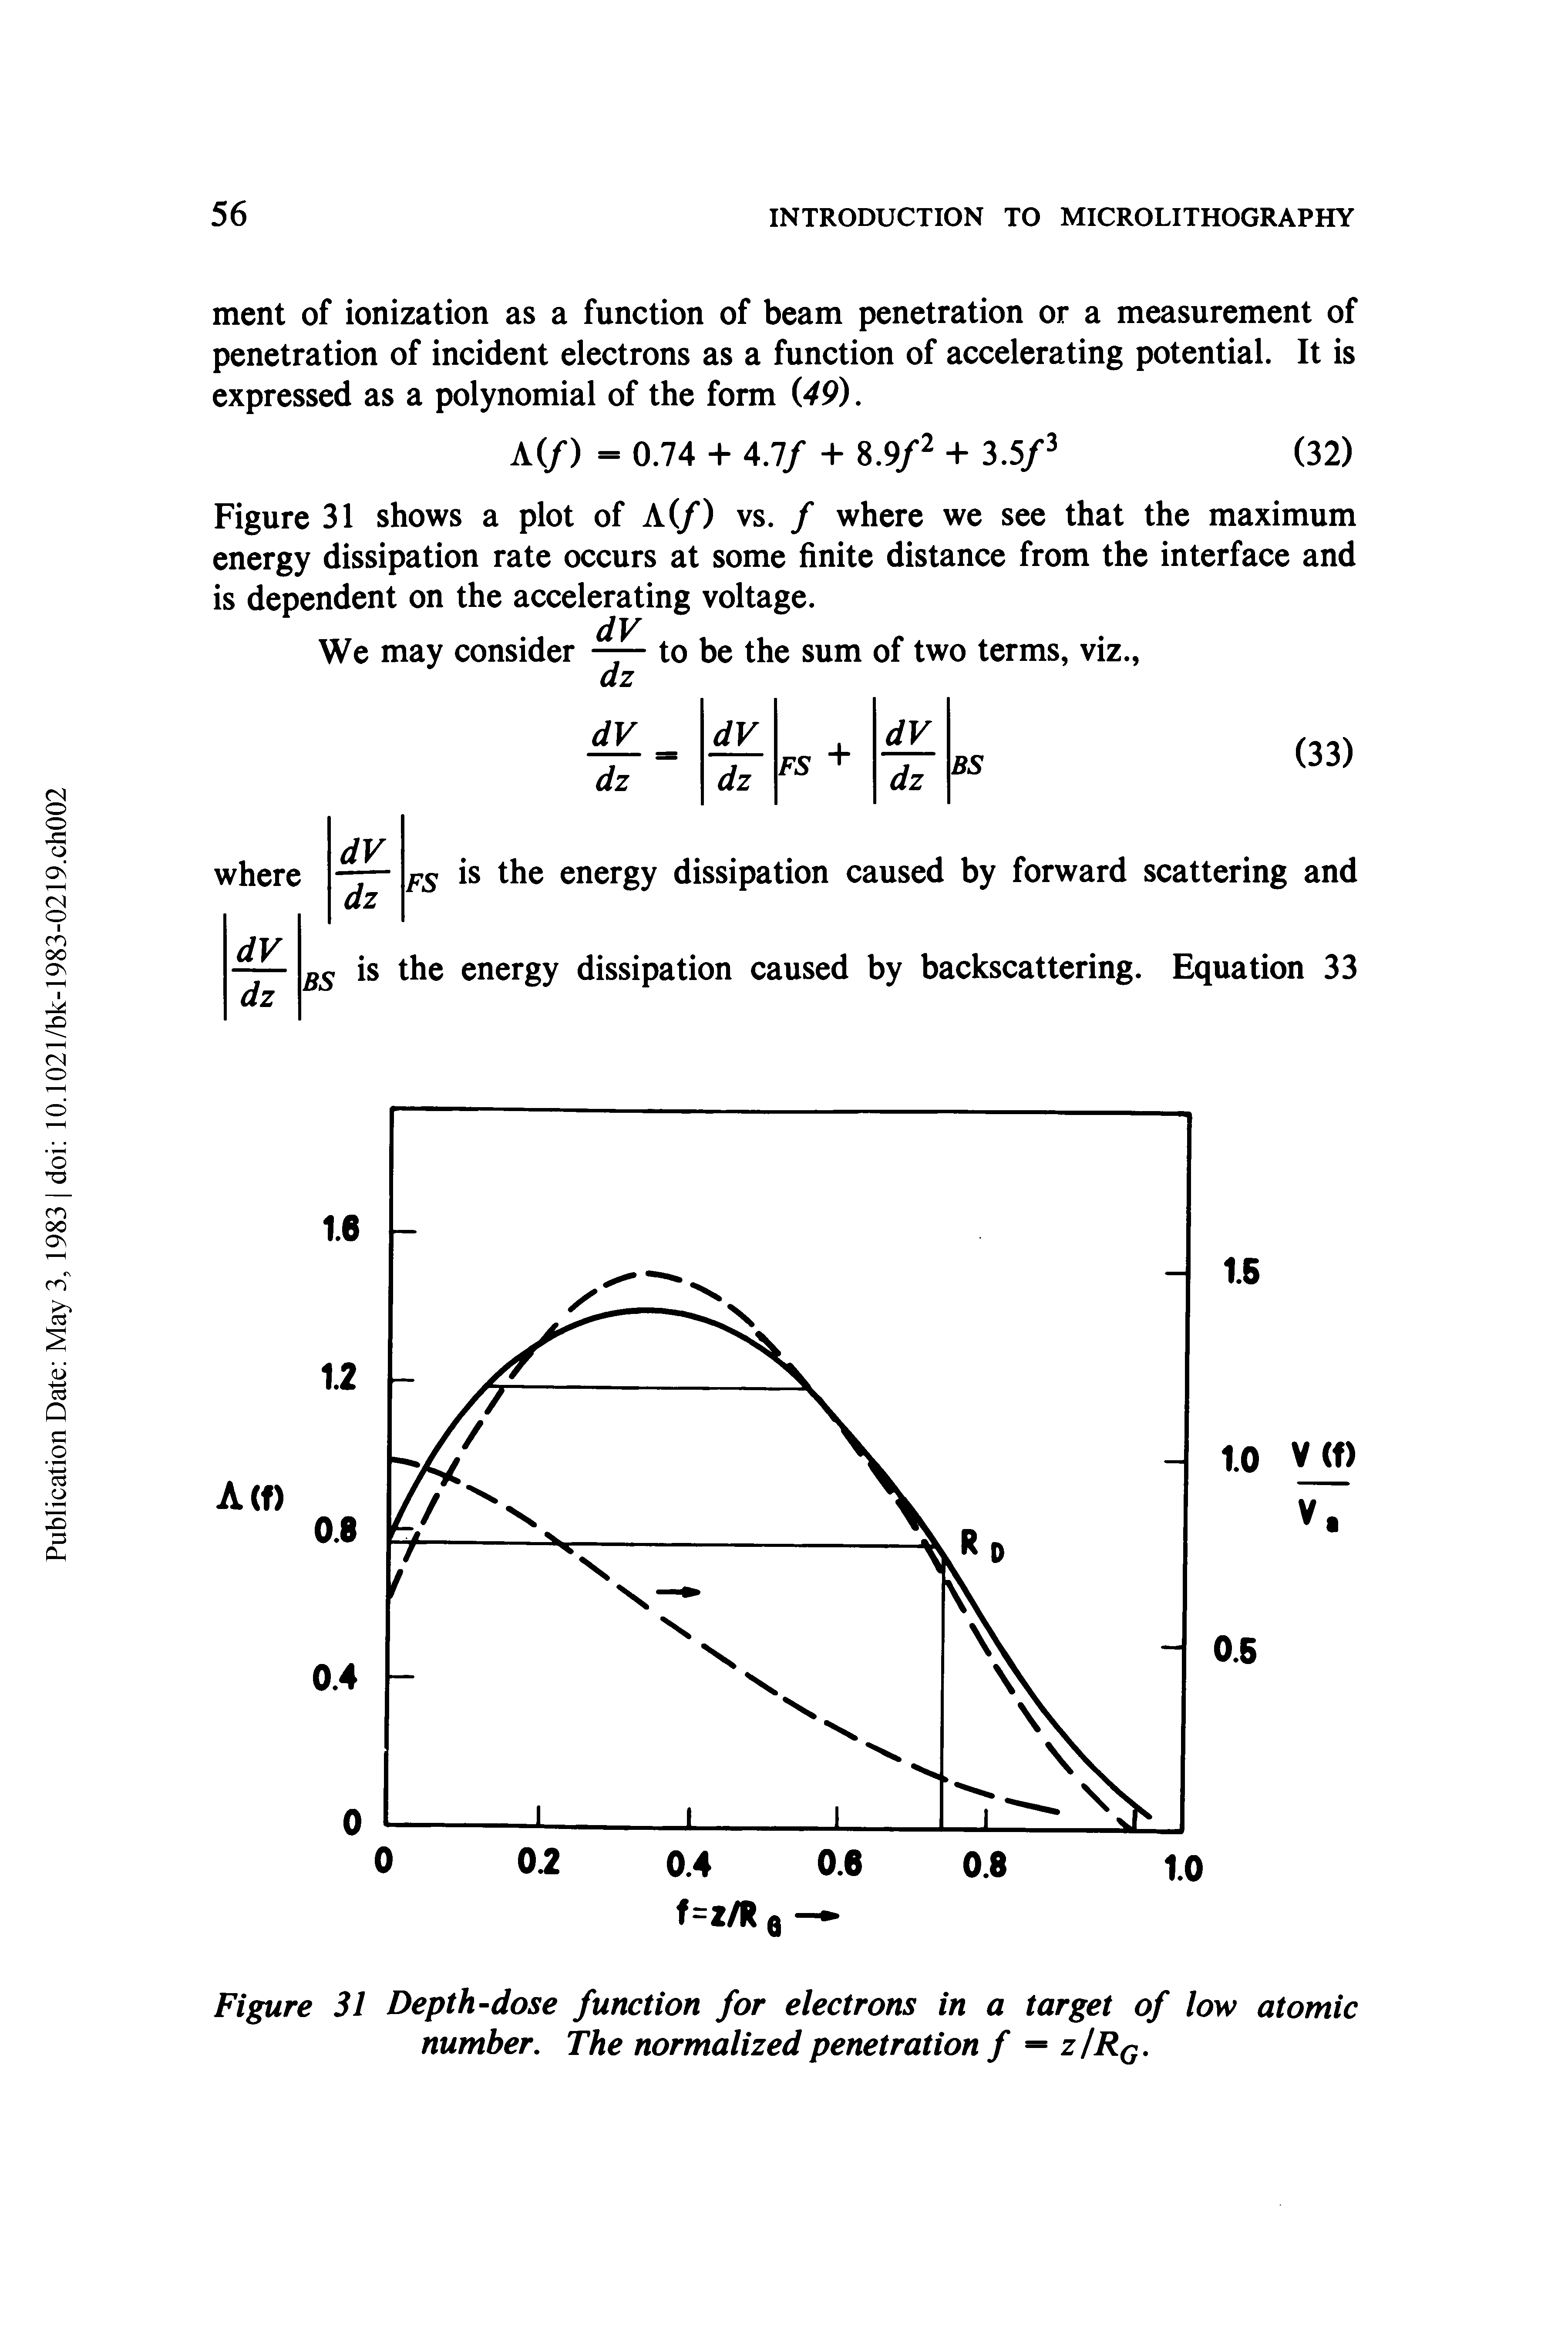 Figure 31 Depth-dose function for electrons in a target of low atomic number. The normalized penetration f = z/Rq.